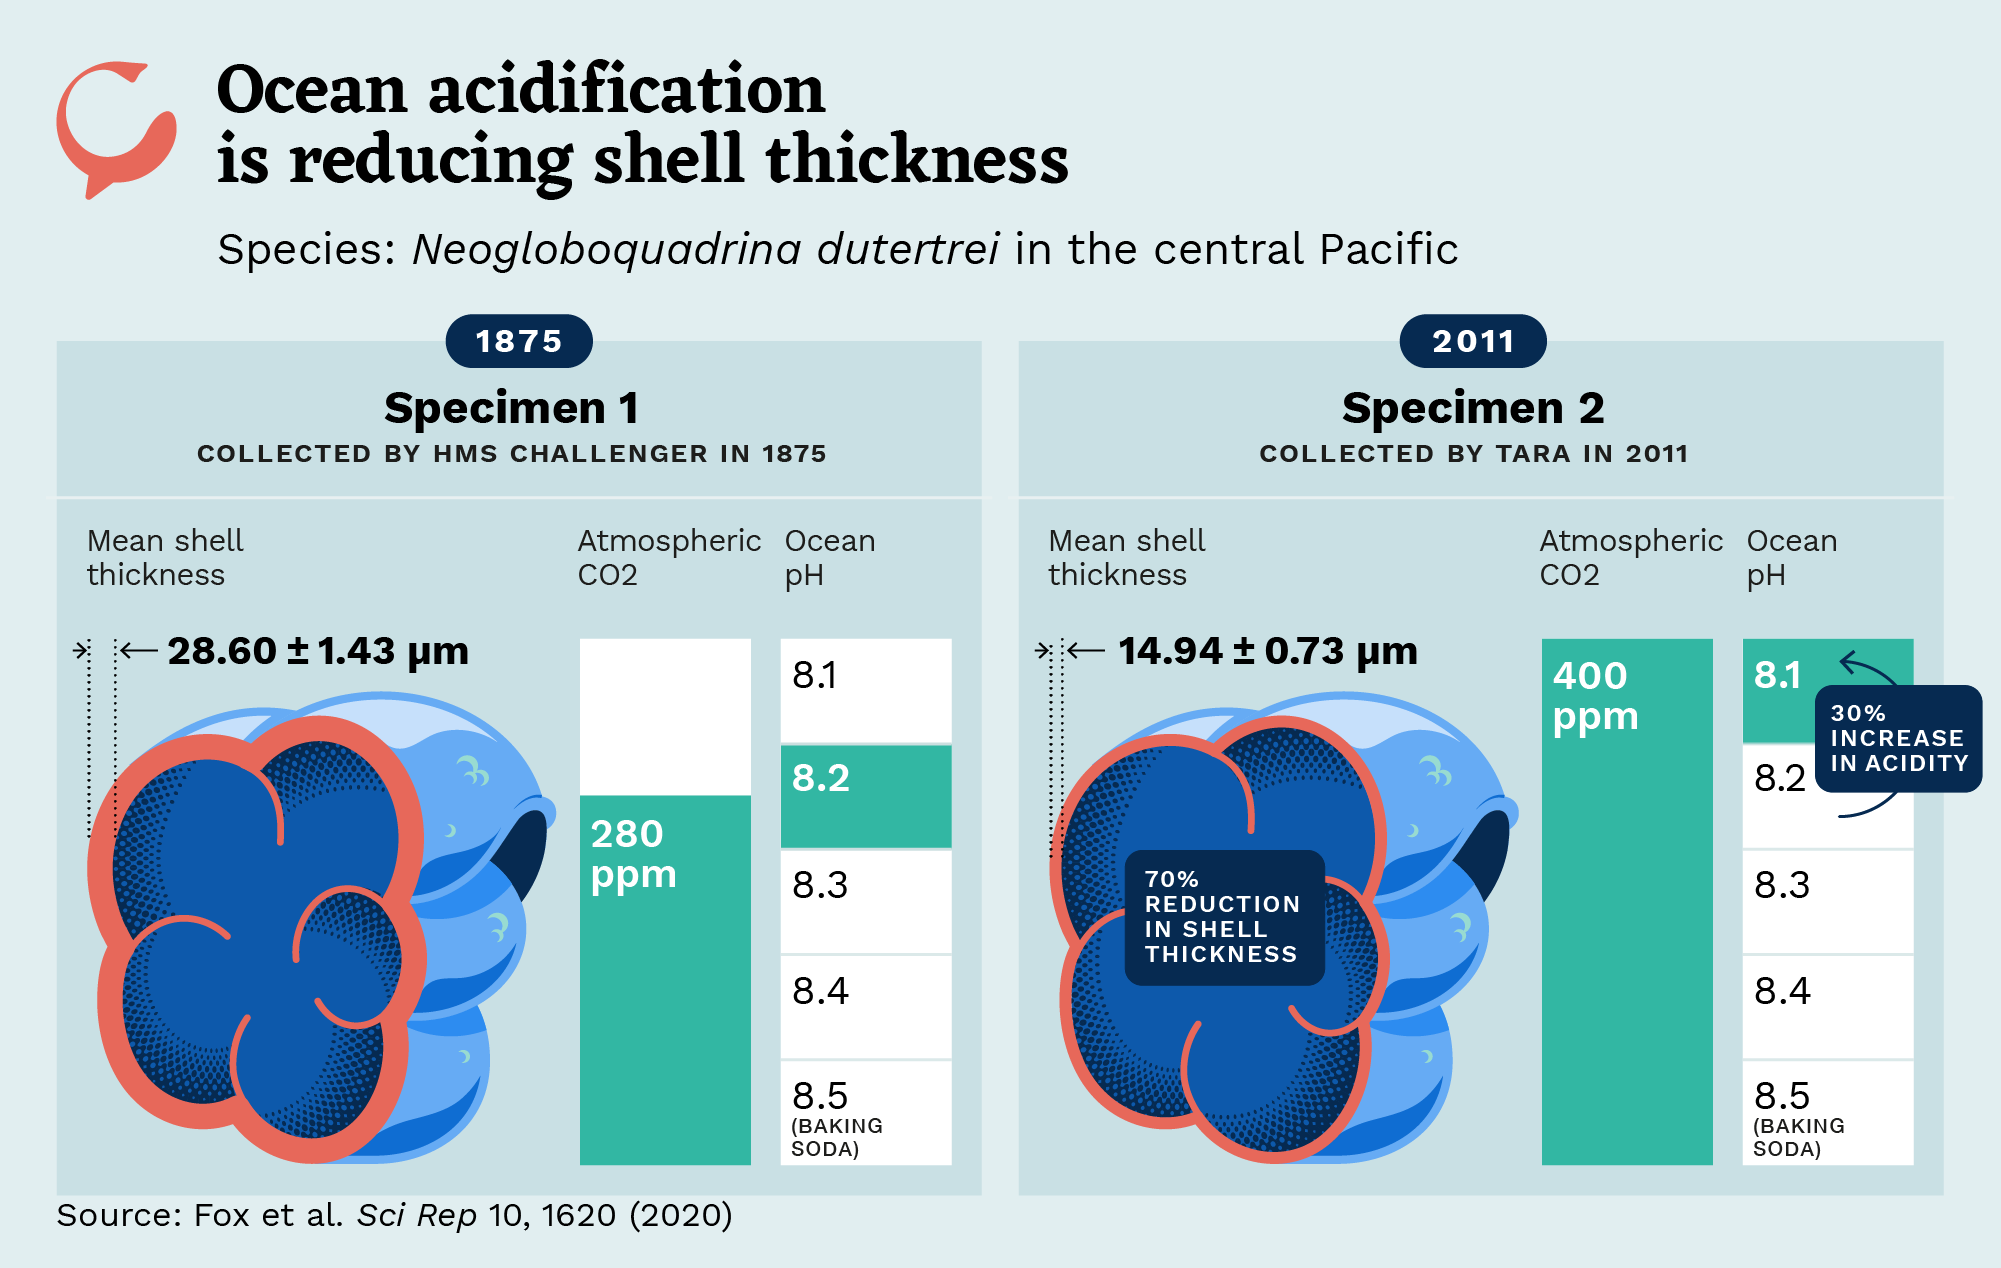 how does climate change affect marine life? Ocean acidification is reducing shell thickness